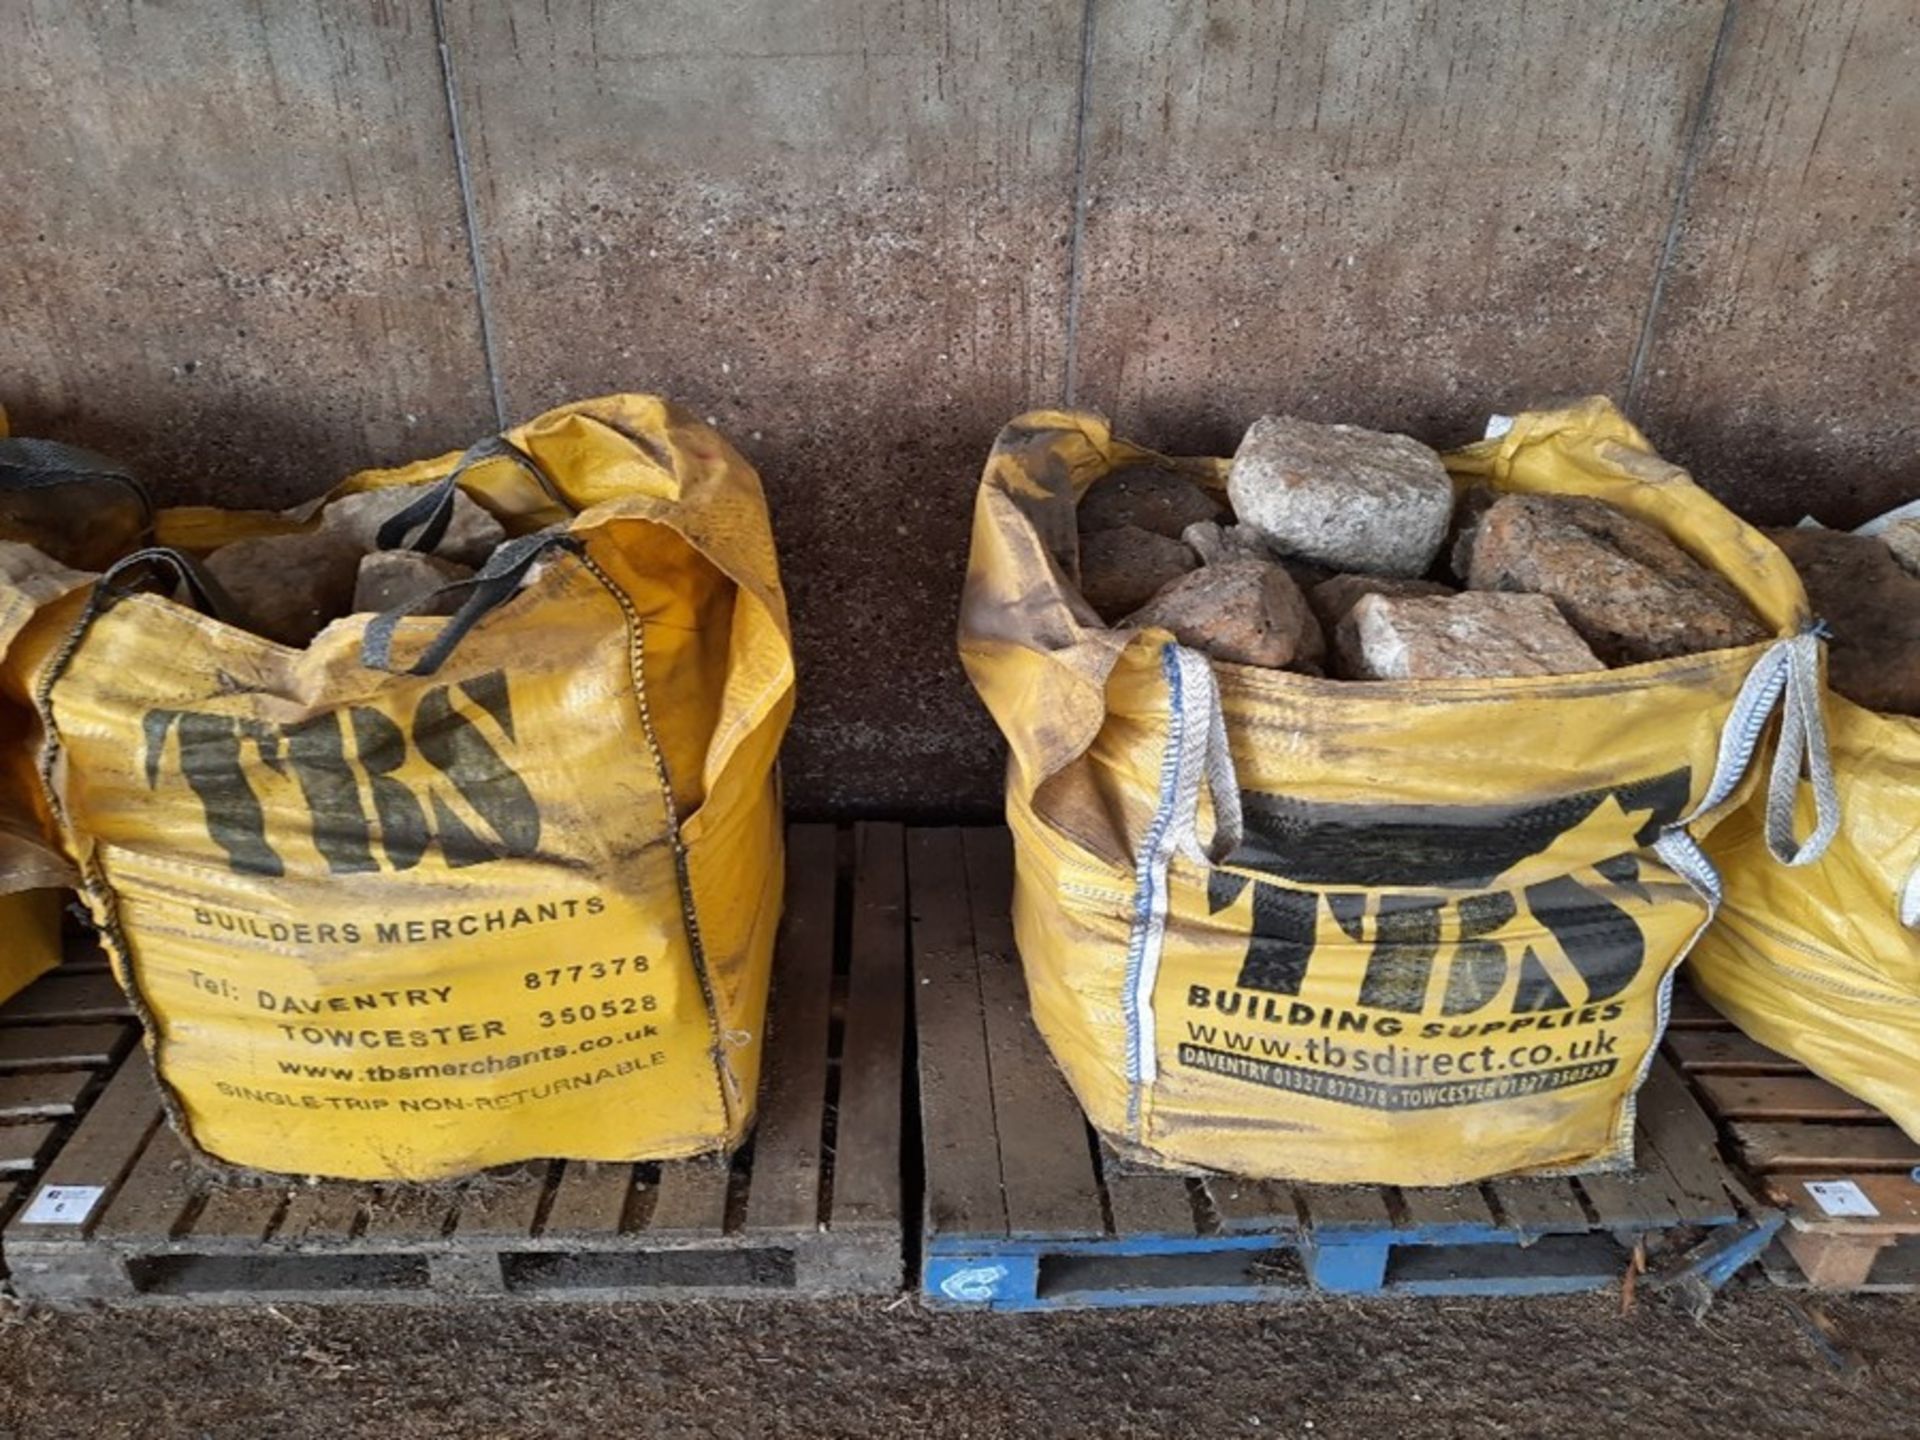 2 x bags of local stone